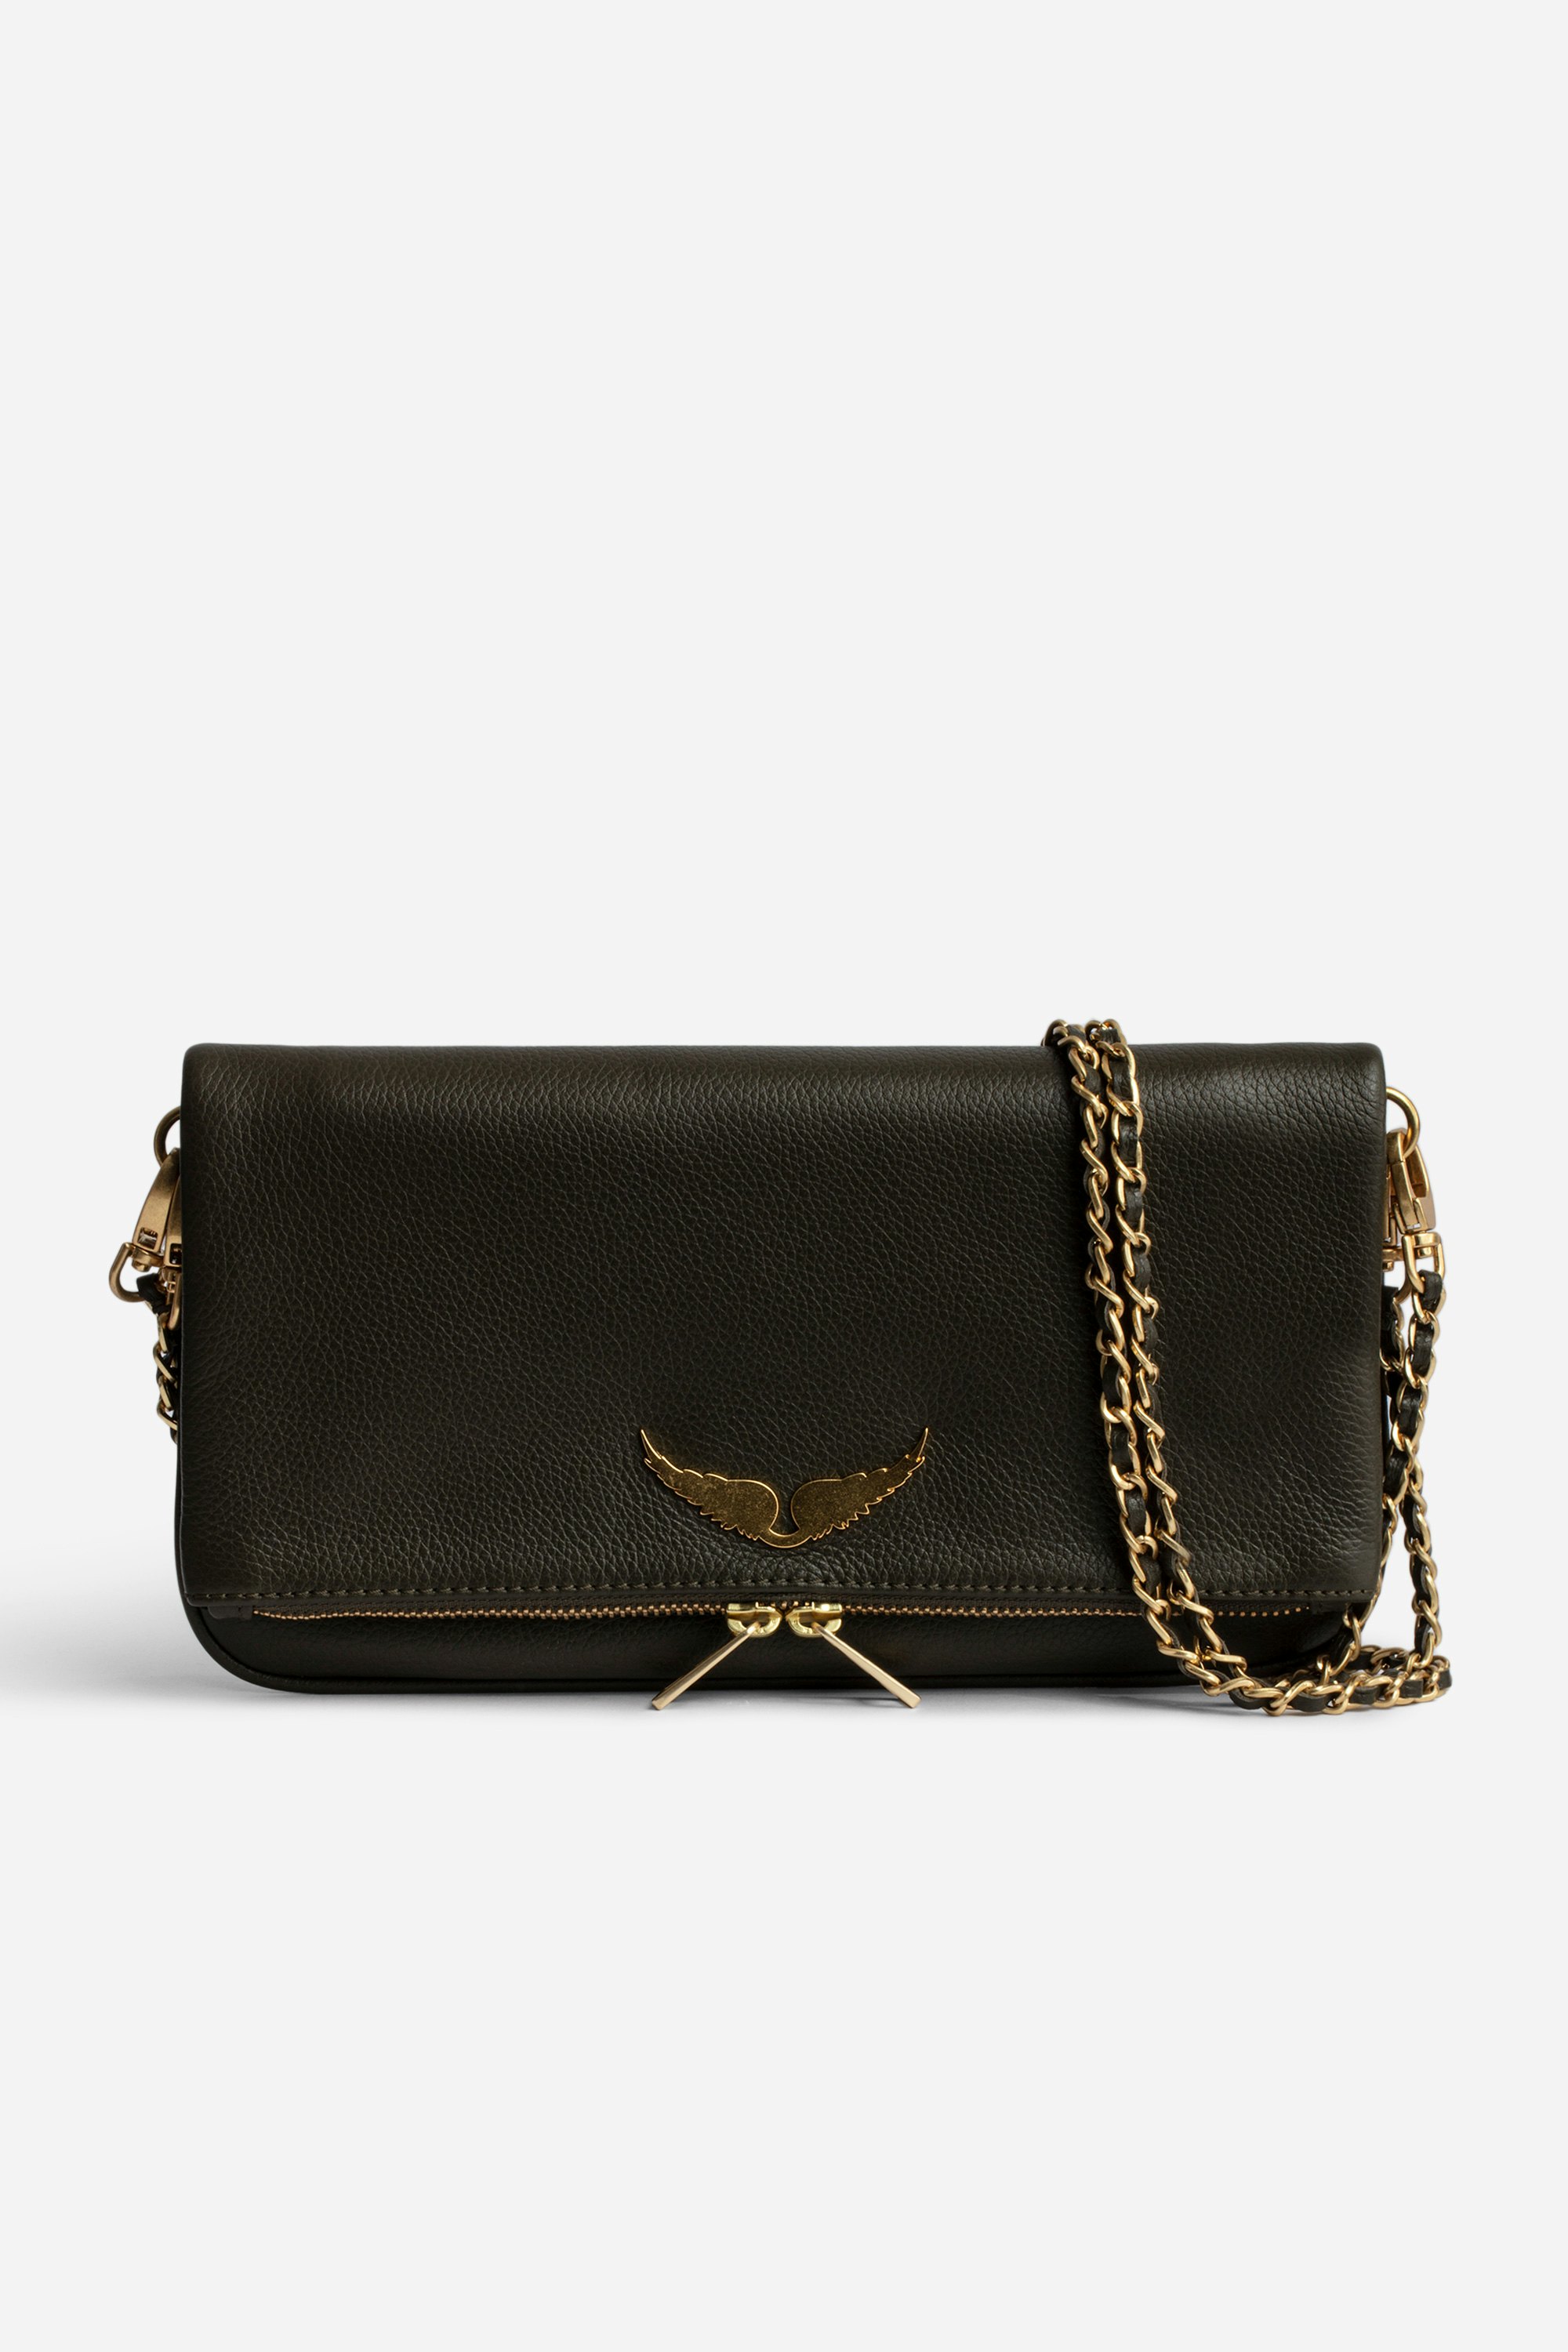 Rock Clutch Women’s khaki grained leather clutch bag with double leather and gold-tone metal chain strap.